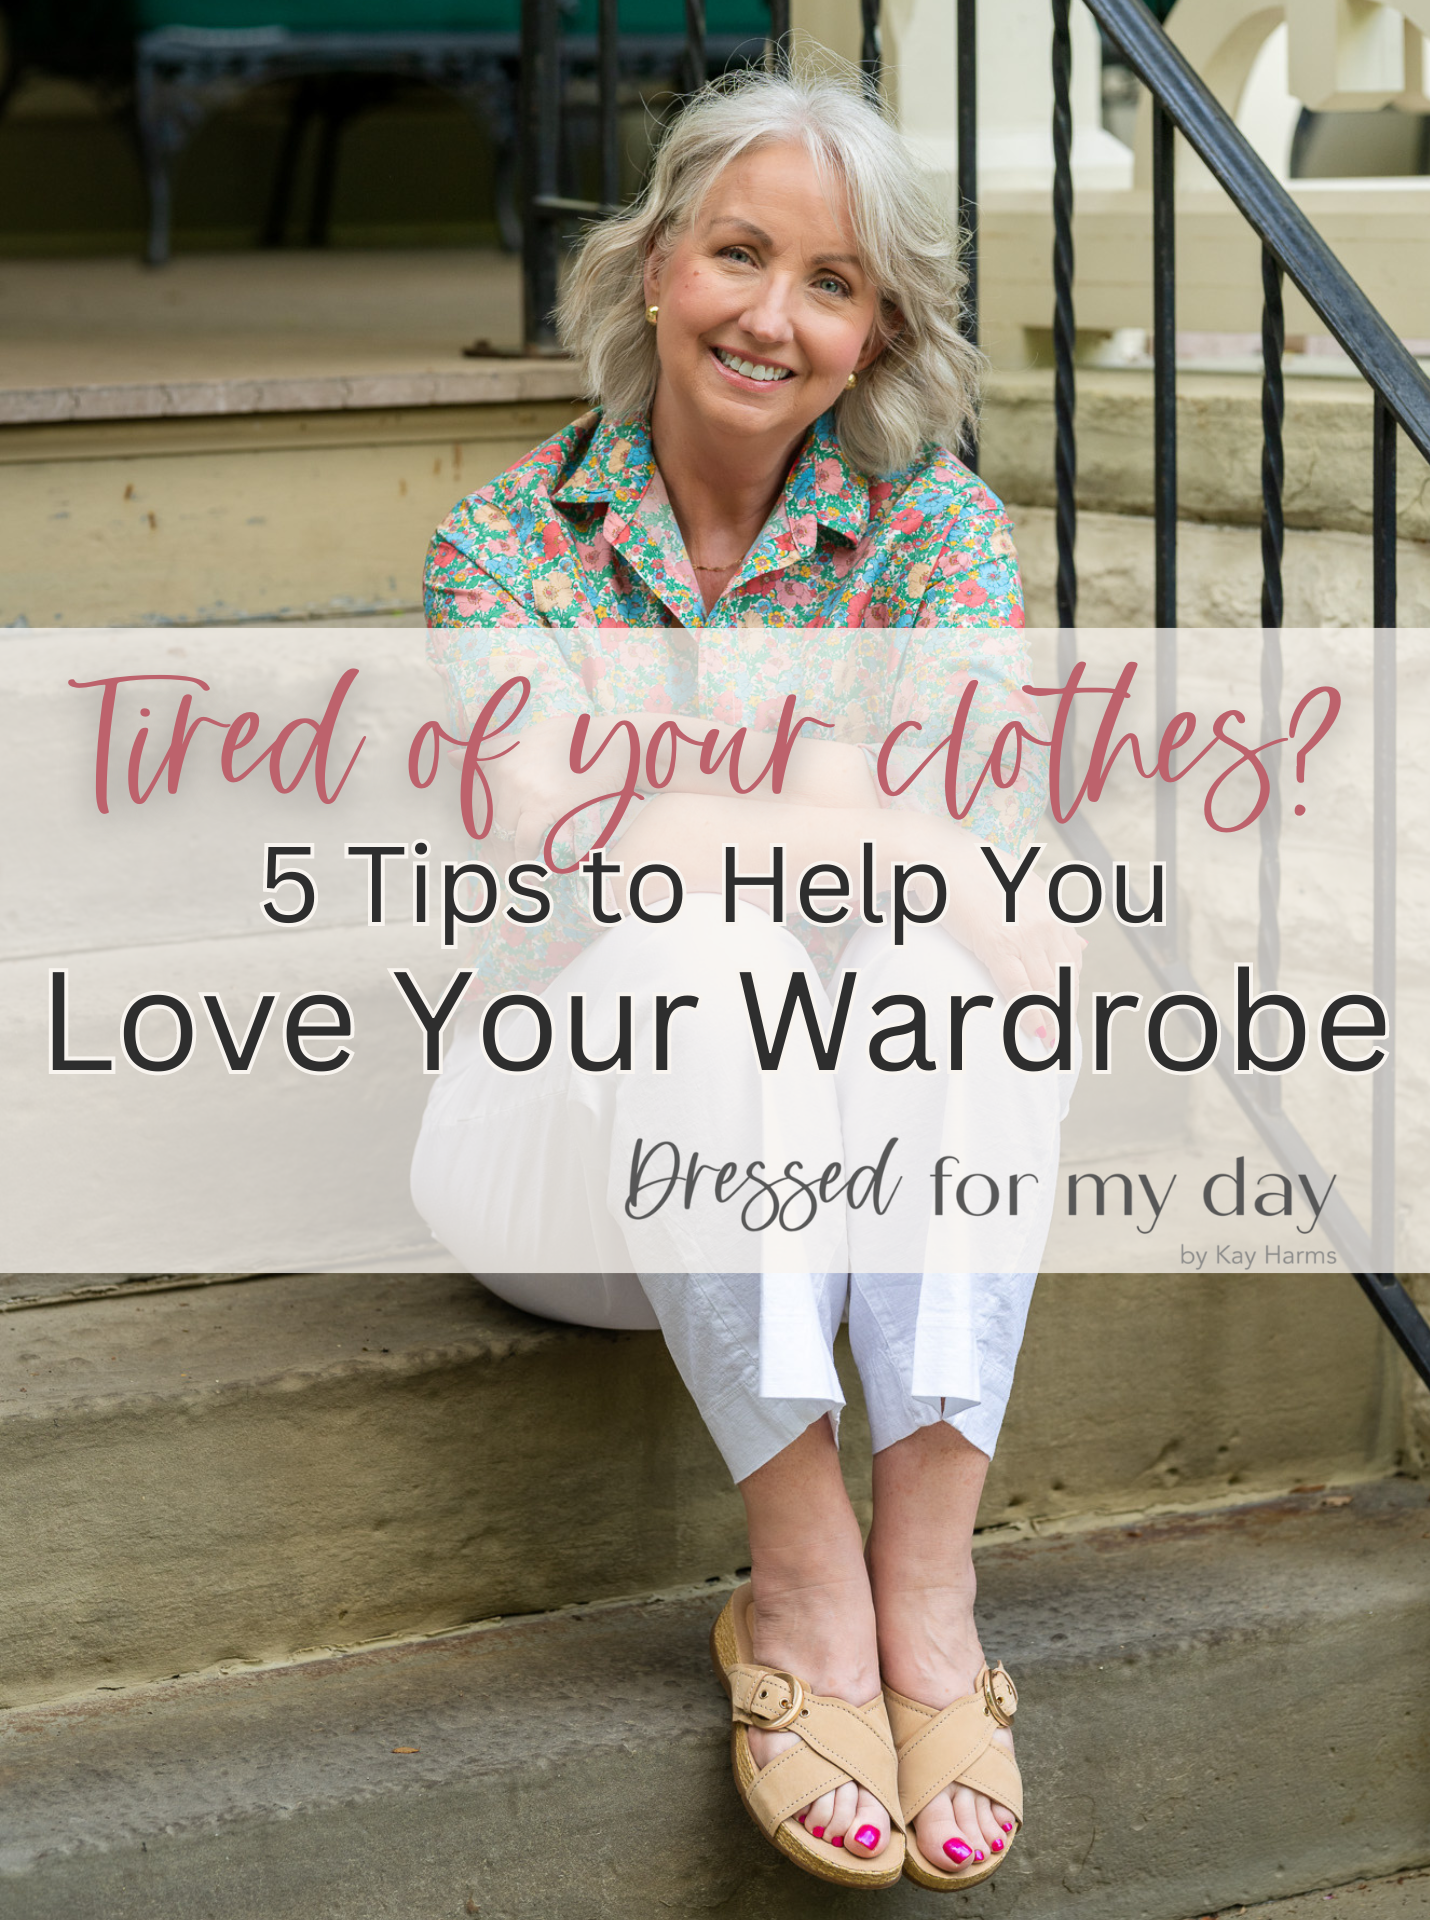 5 Tips to Help You Love Your Wardrobe